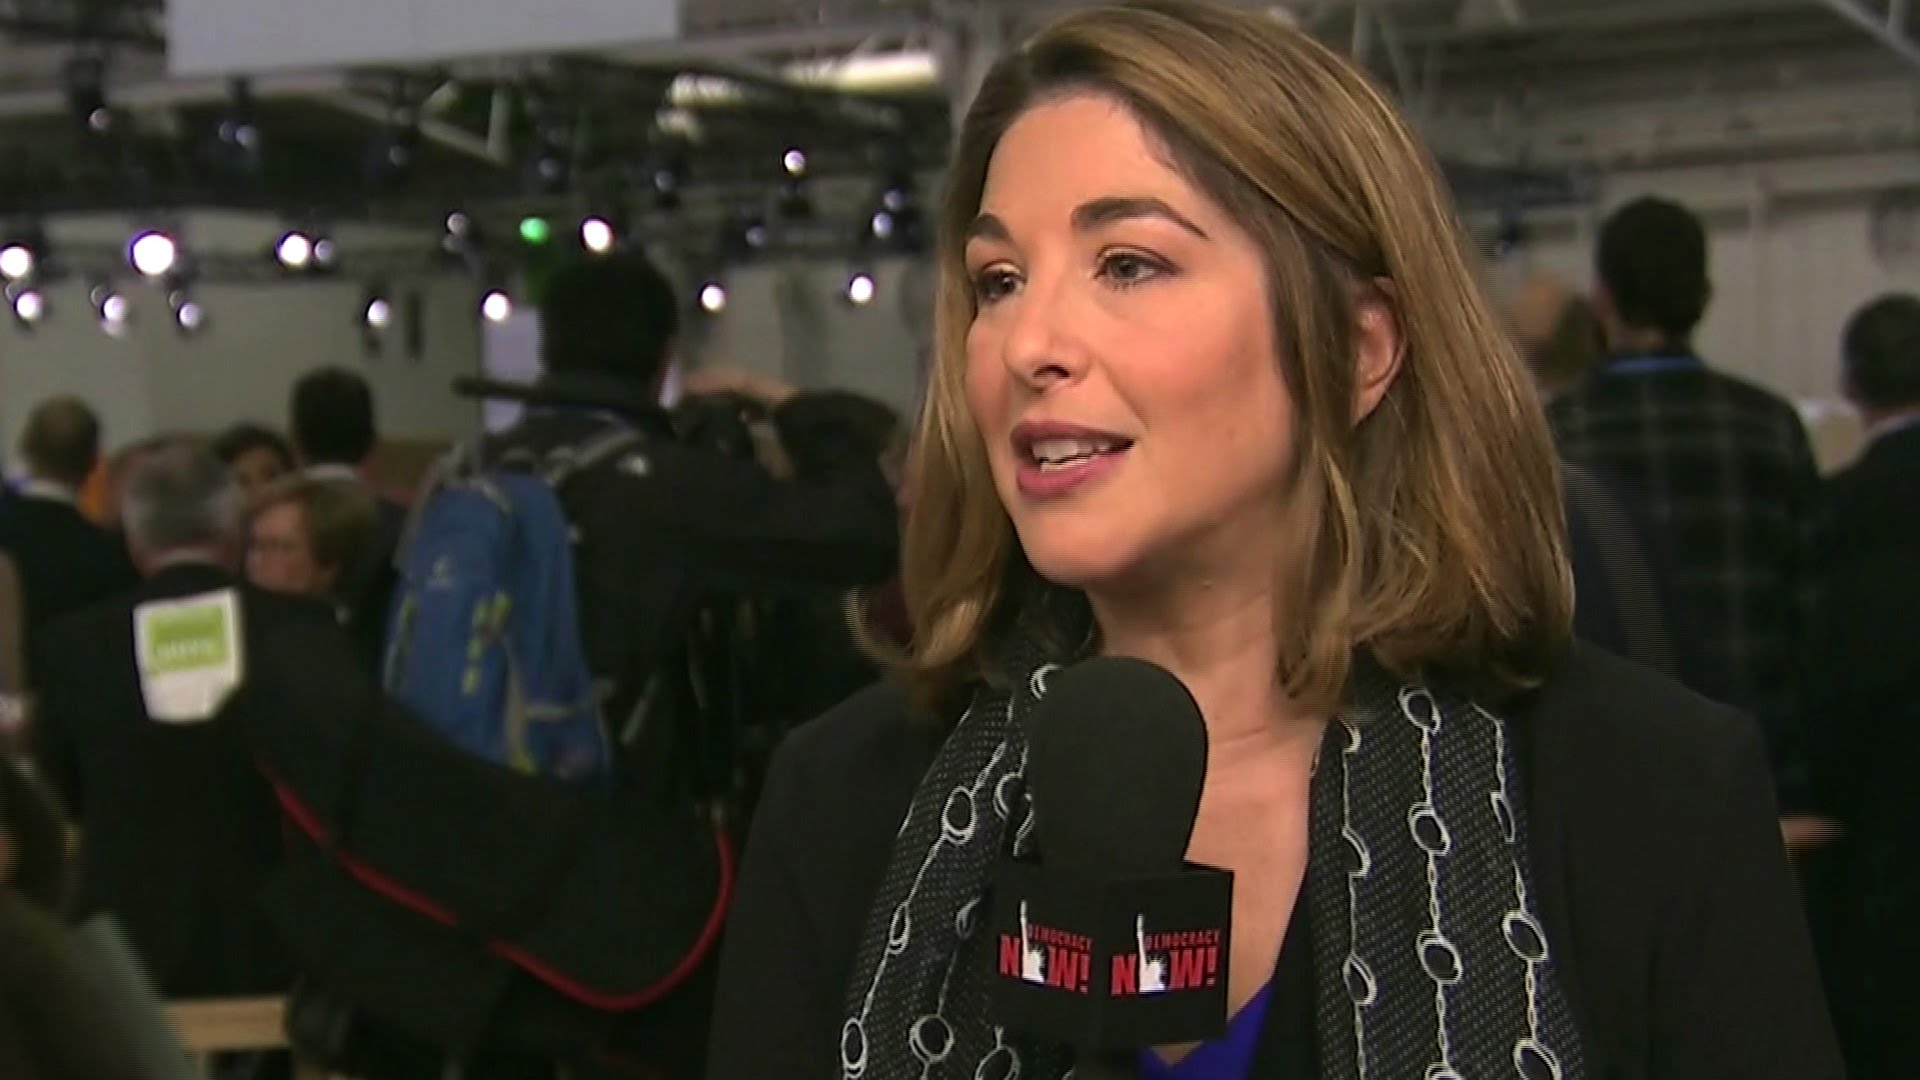 Naomi Klein: Leaders’ Inaction on Climate Crisis is ‘Violence’